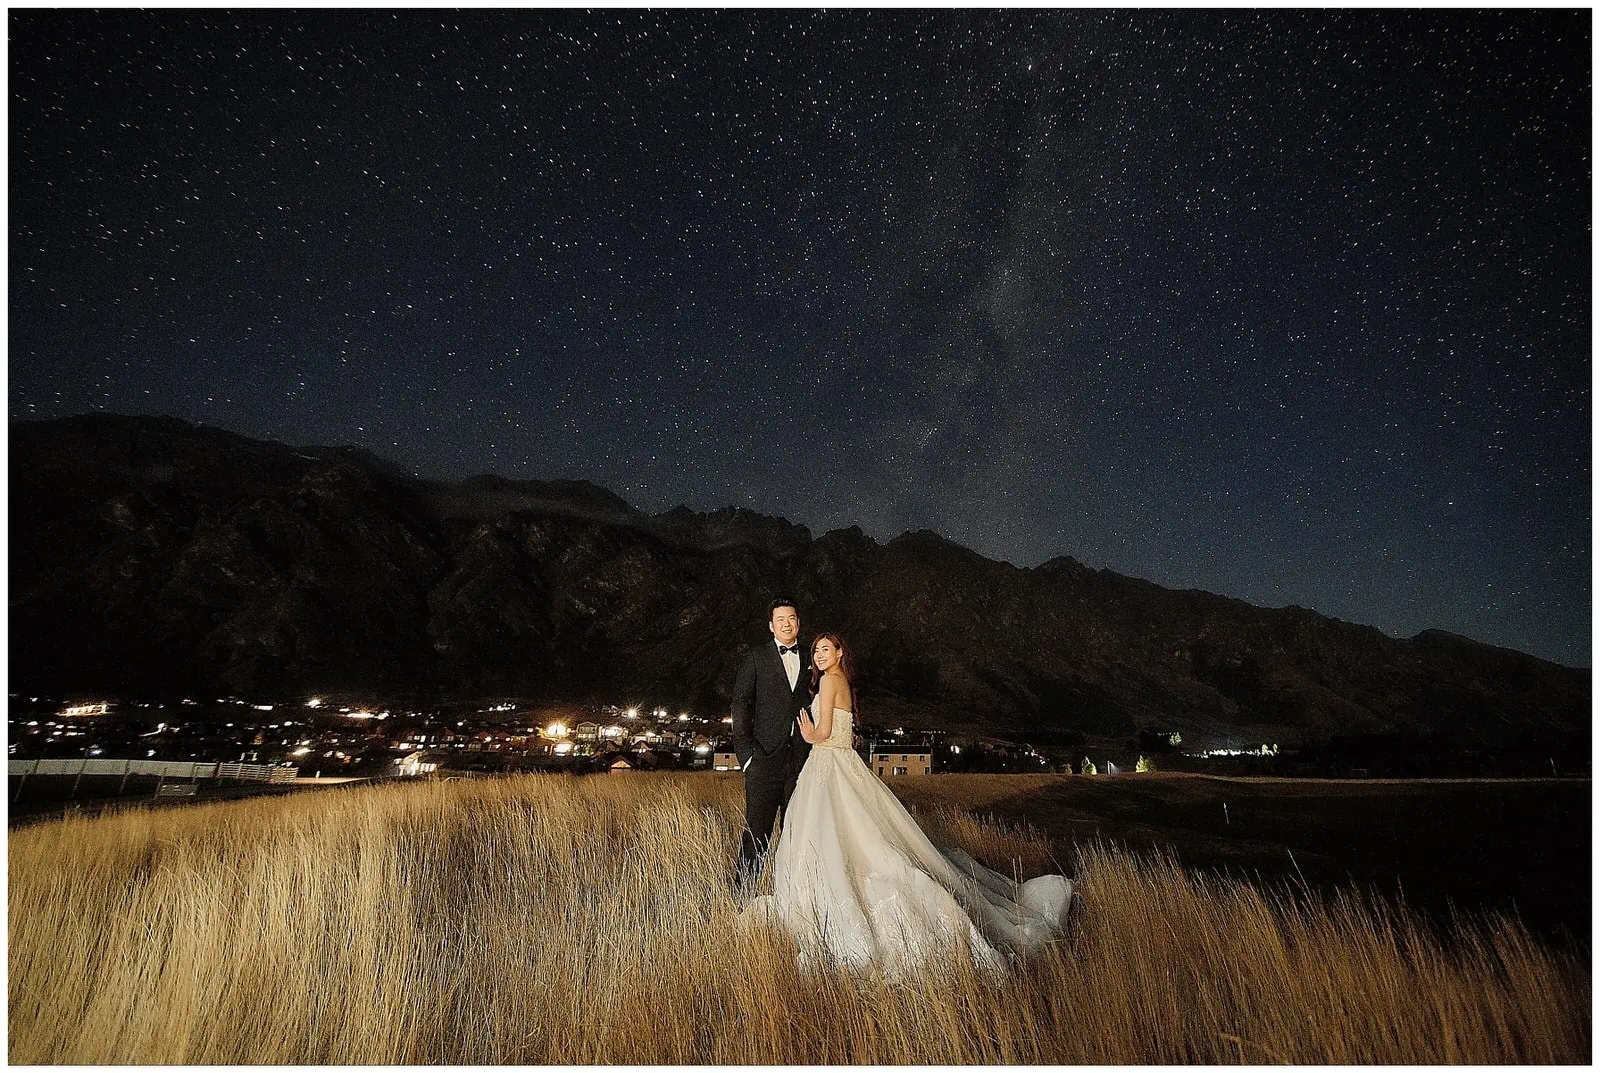 Queenstown New Zealand Elopement Wedding Photographer - A bride and groom standing in a field under the starry night.